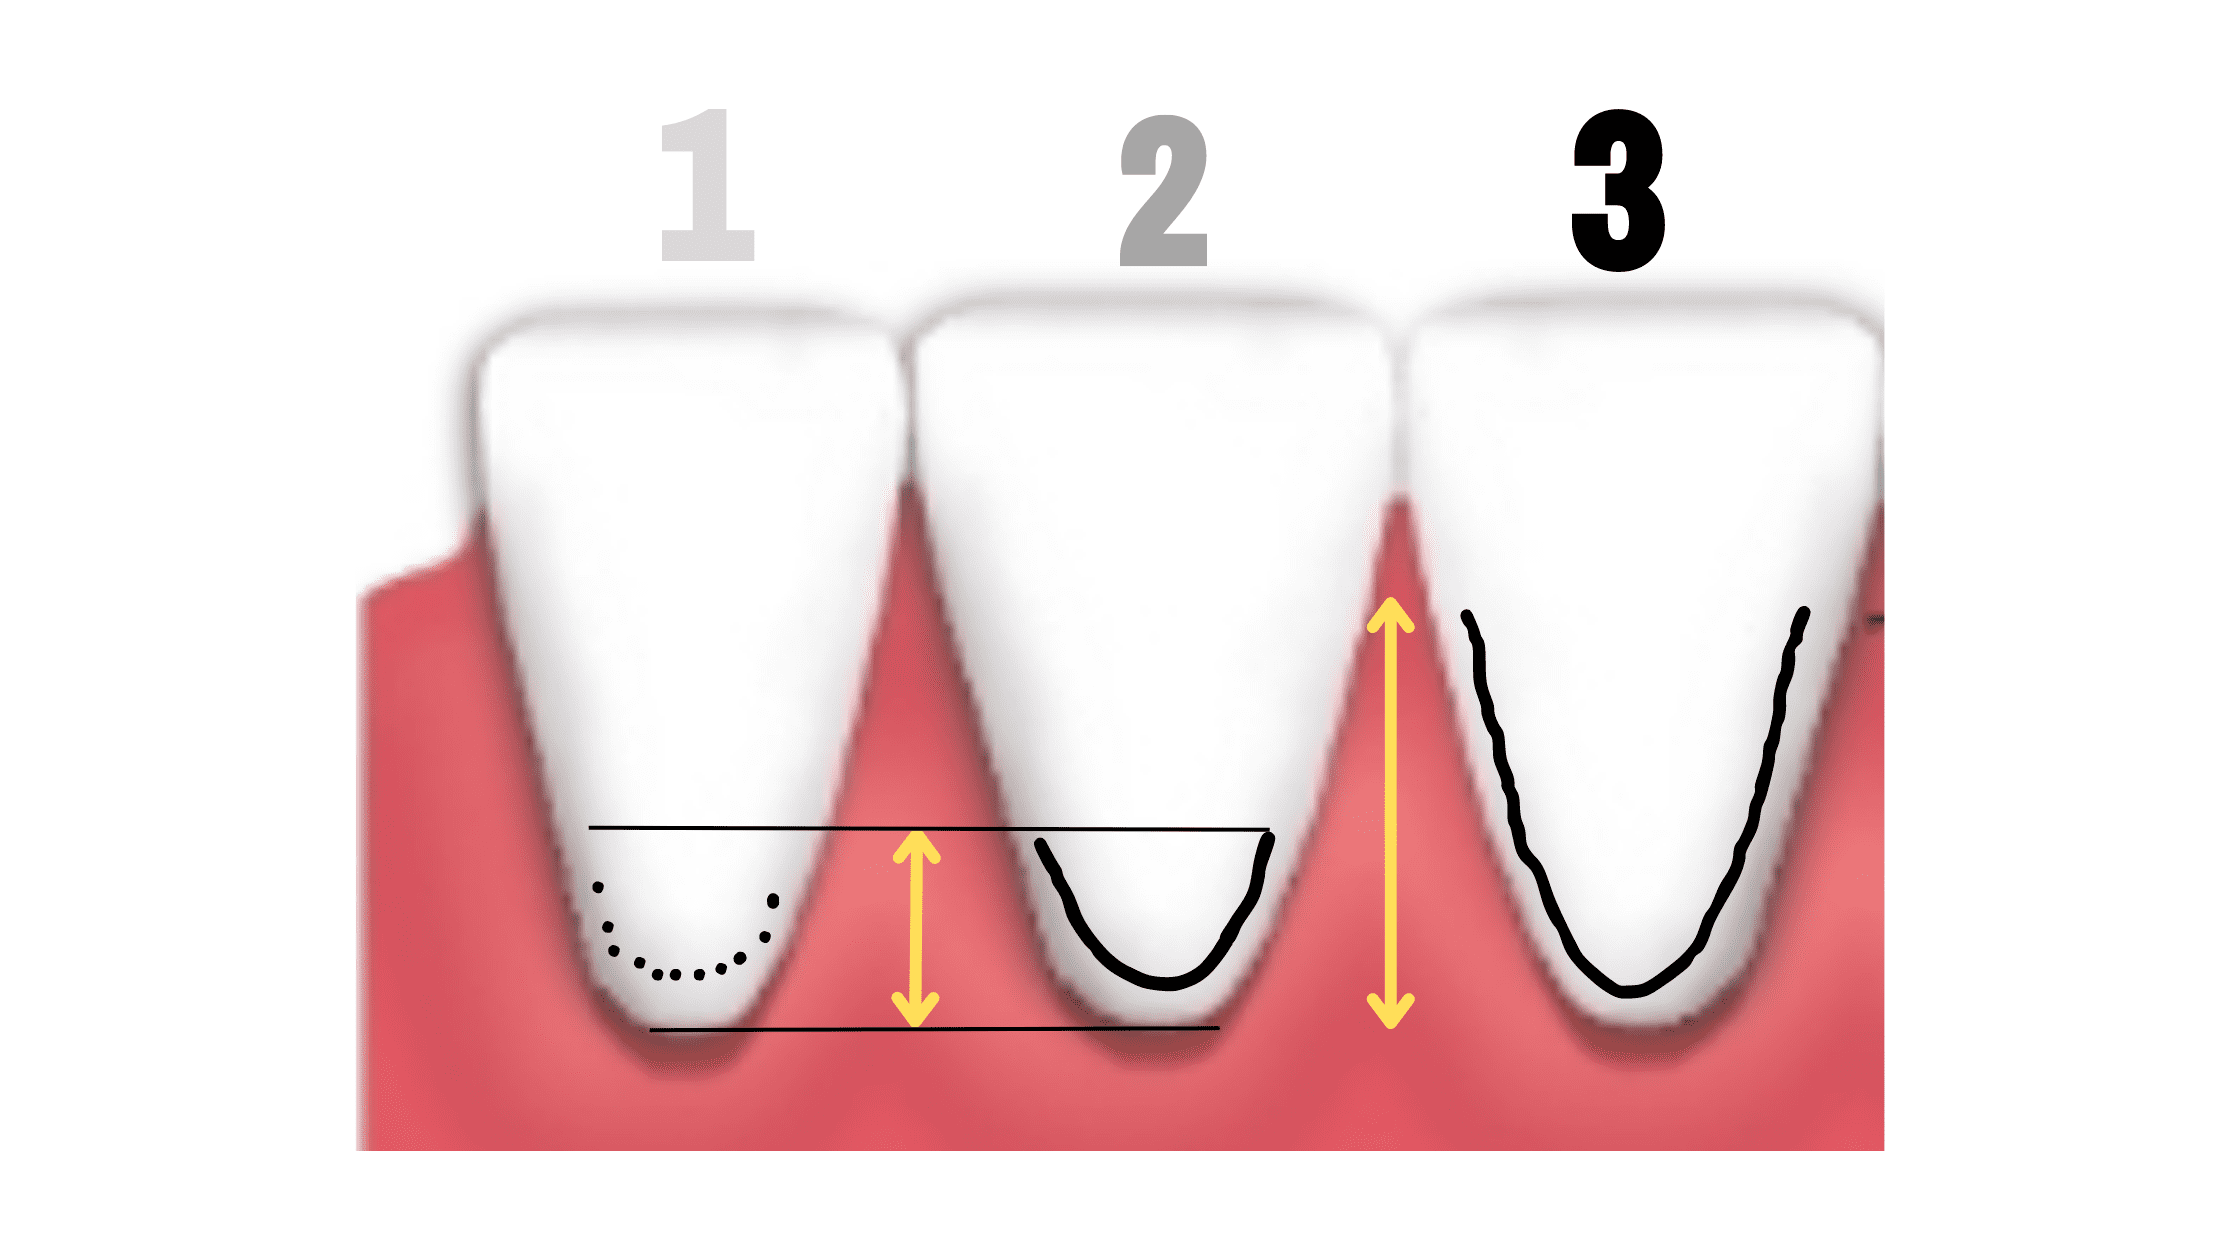 The classification of black line stains on teeth according to Gasparetto et al.